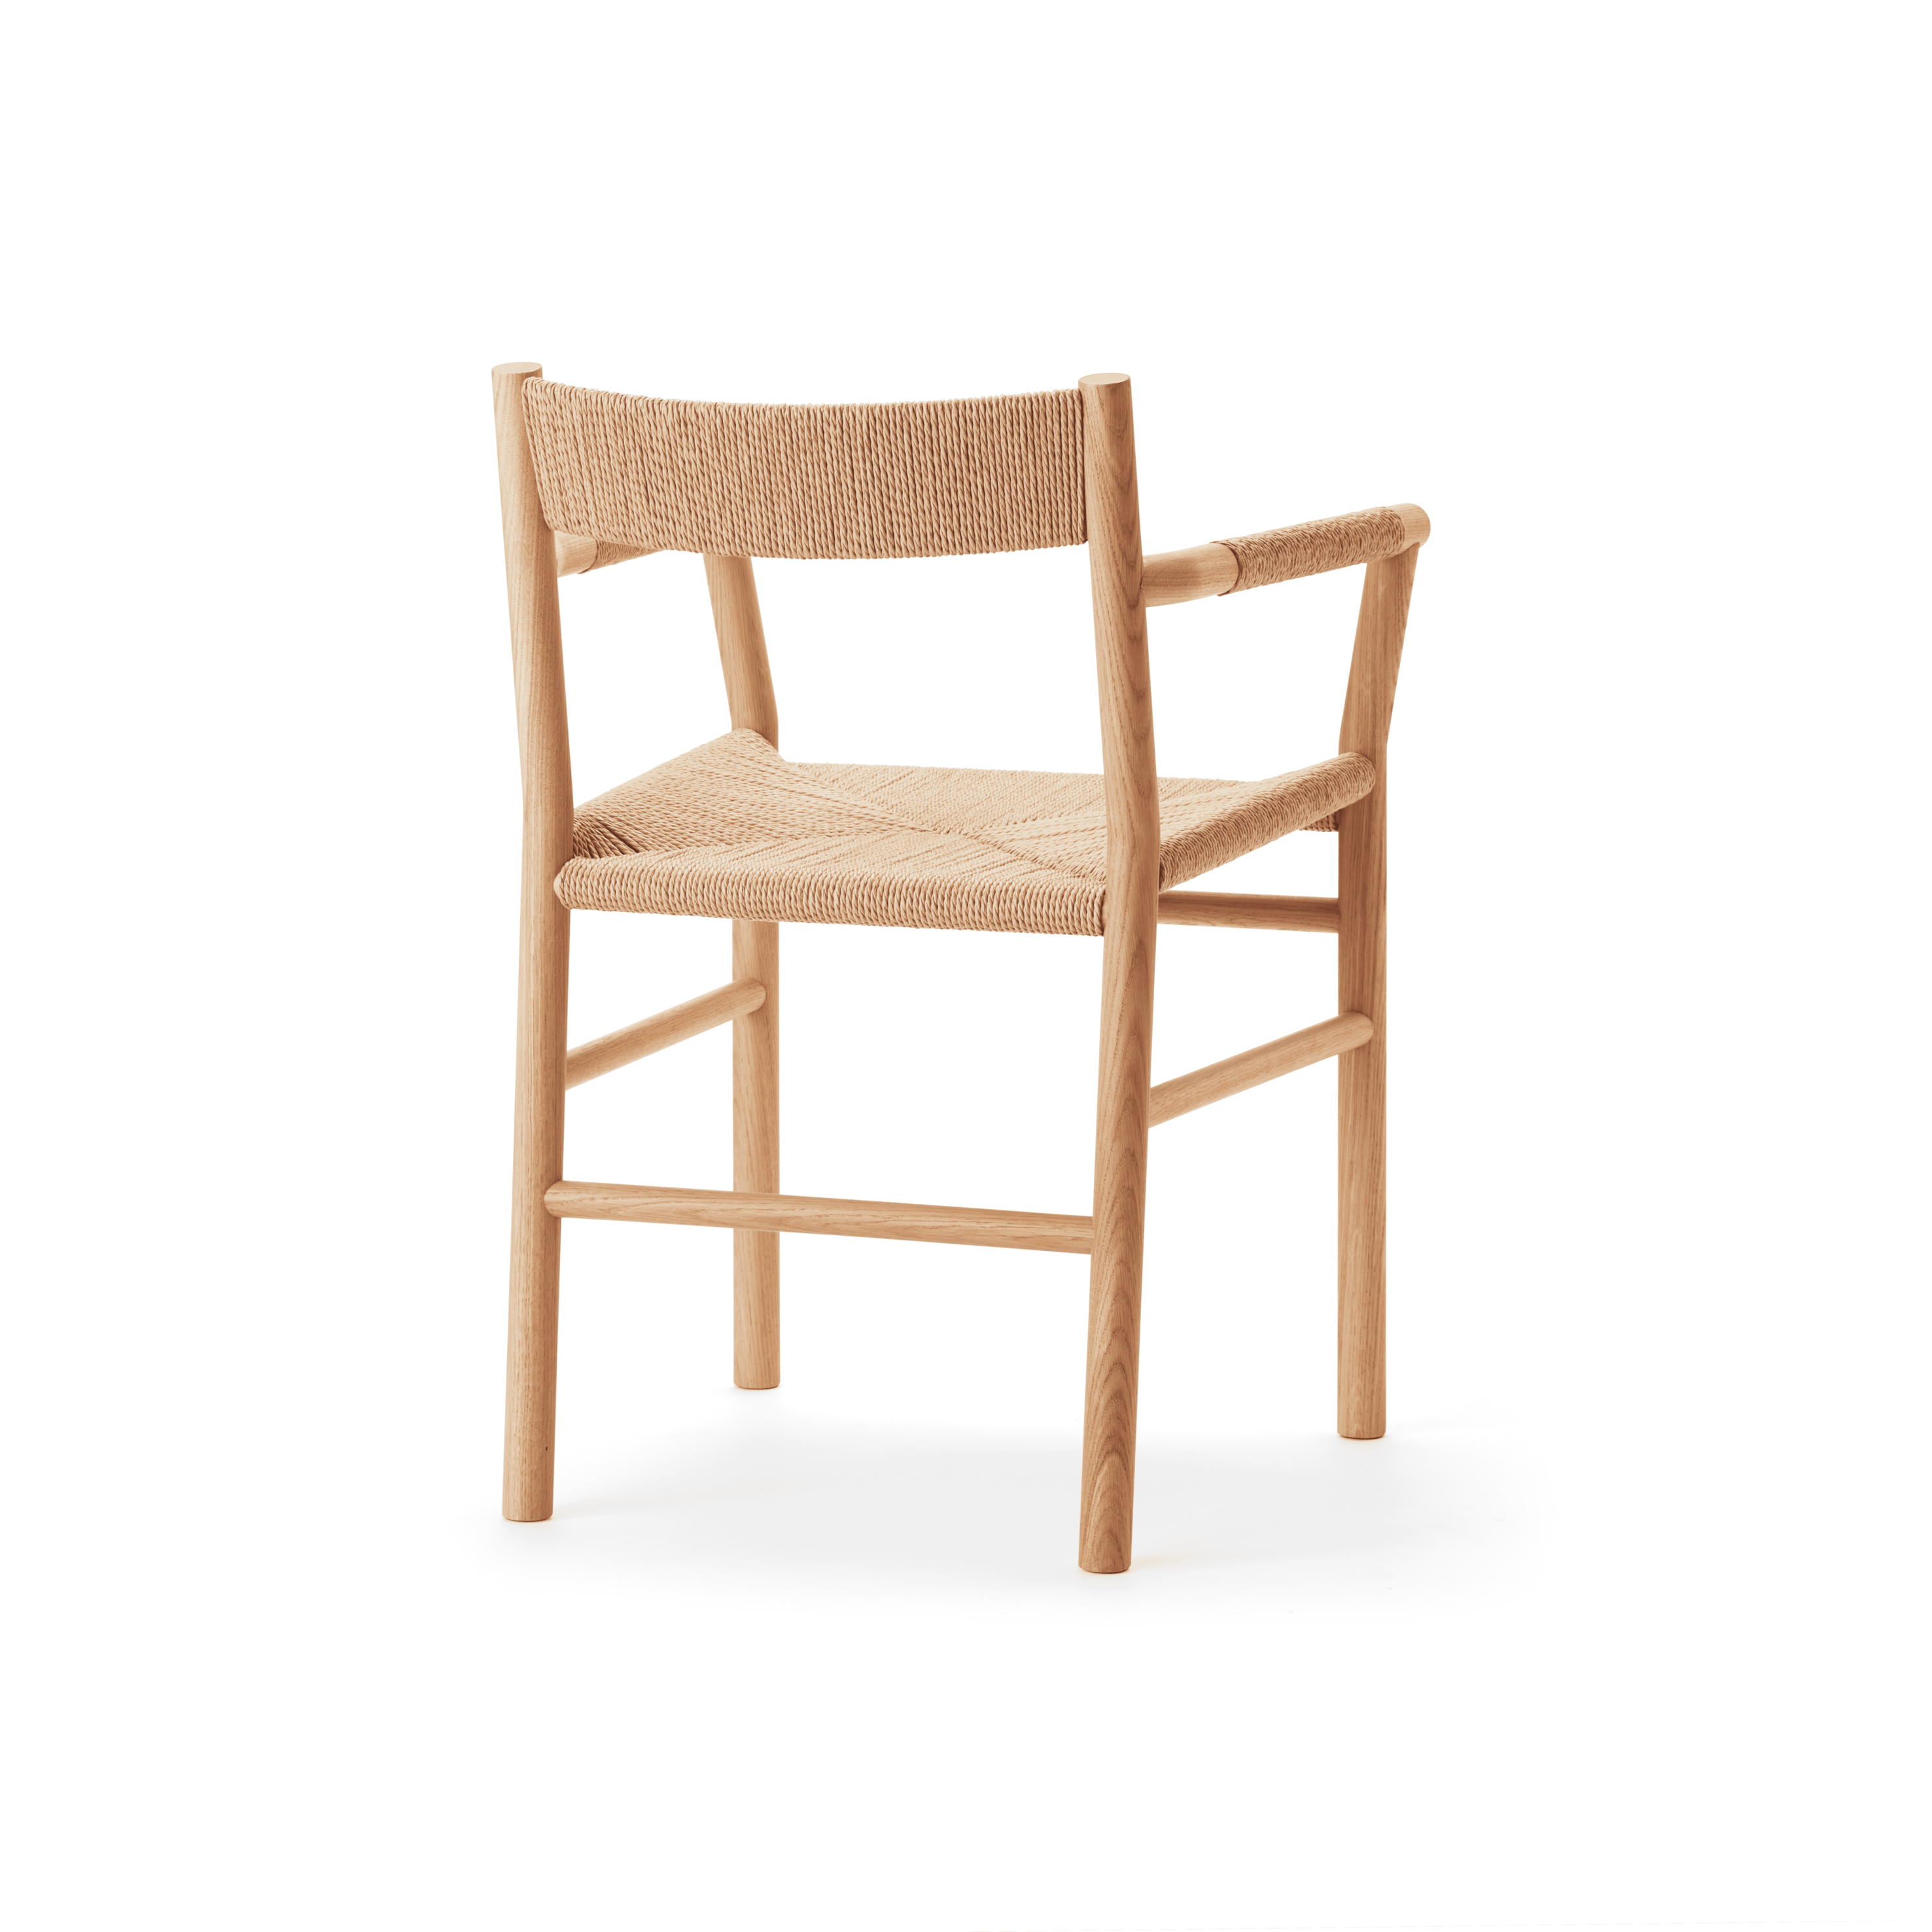 CORD - Oak chair with armrests